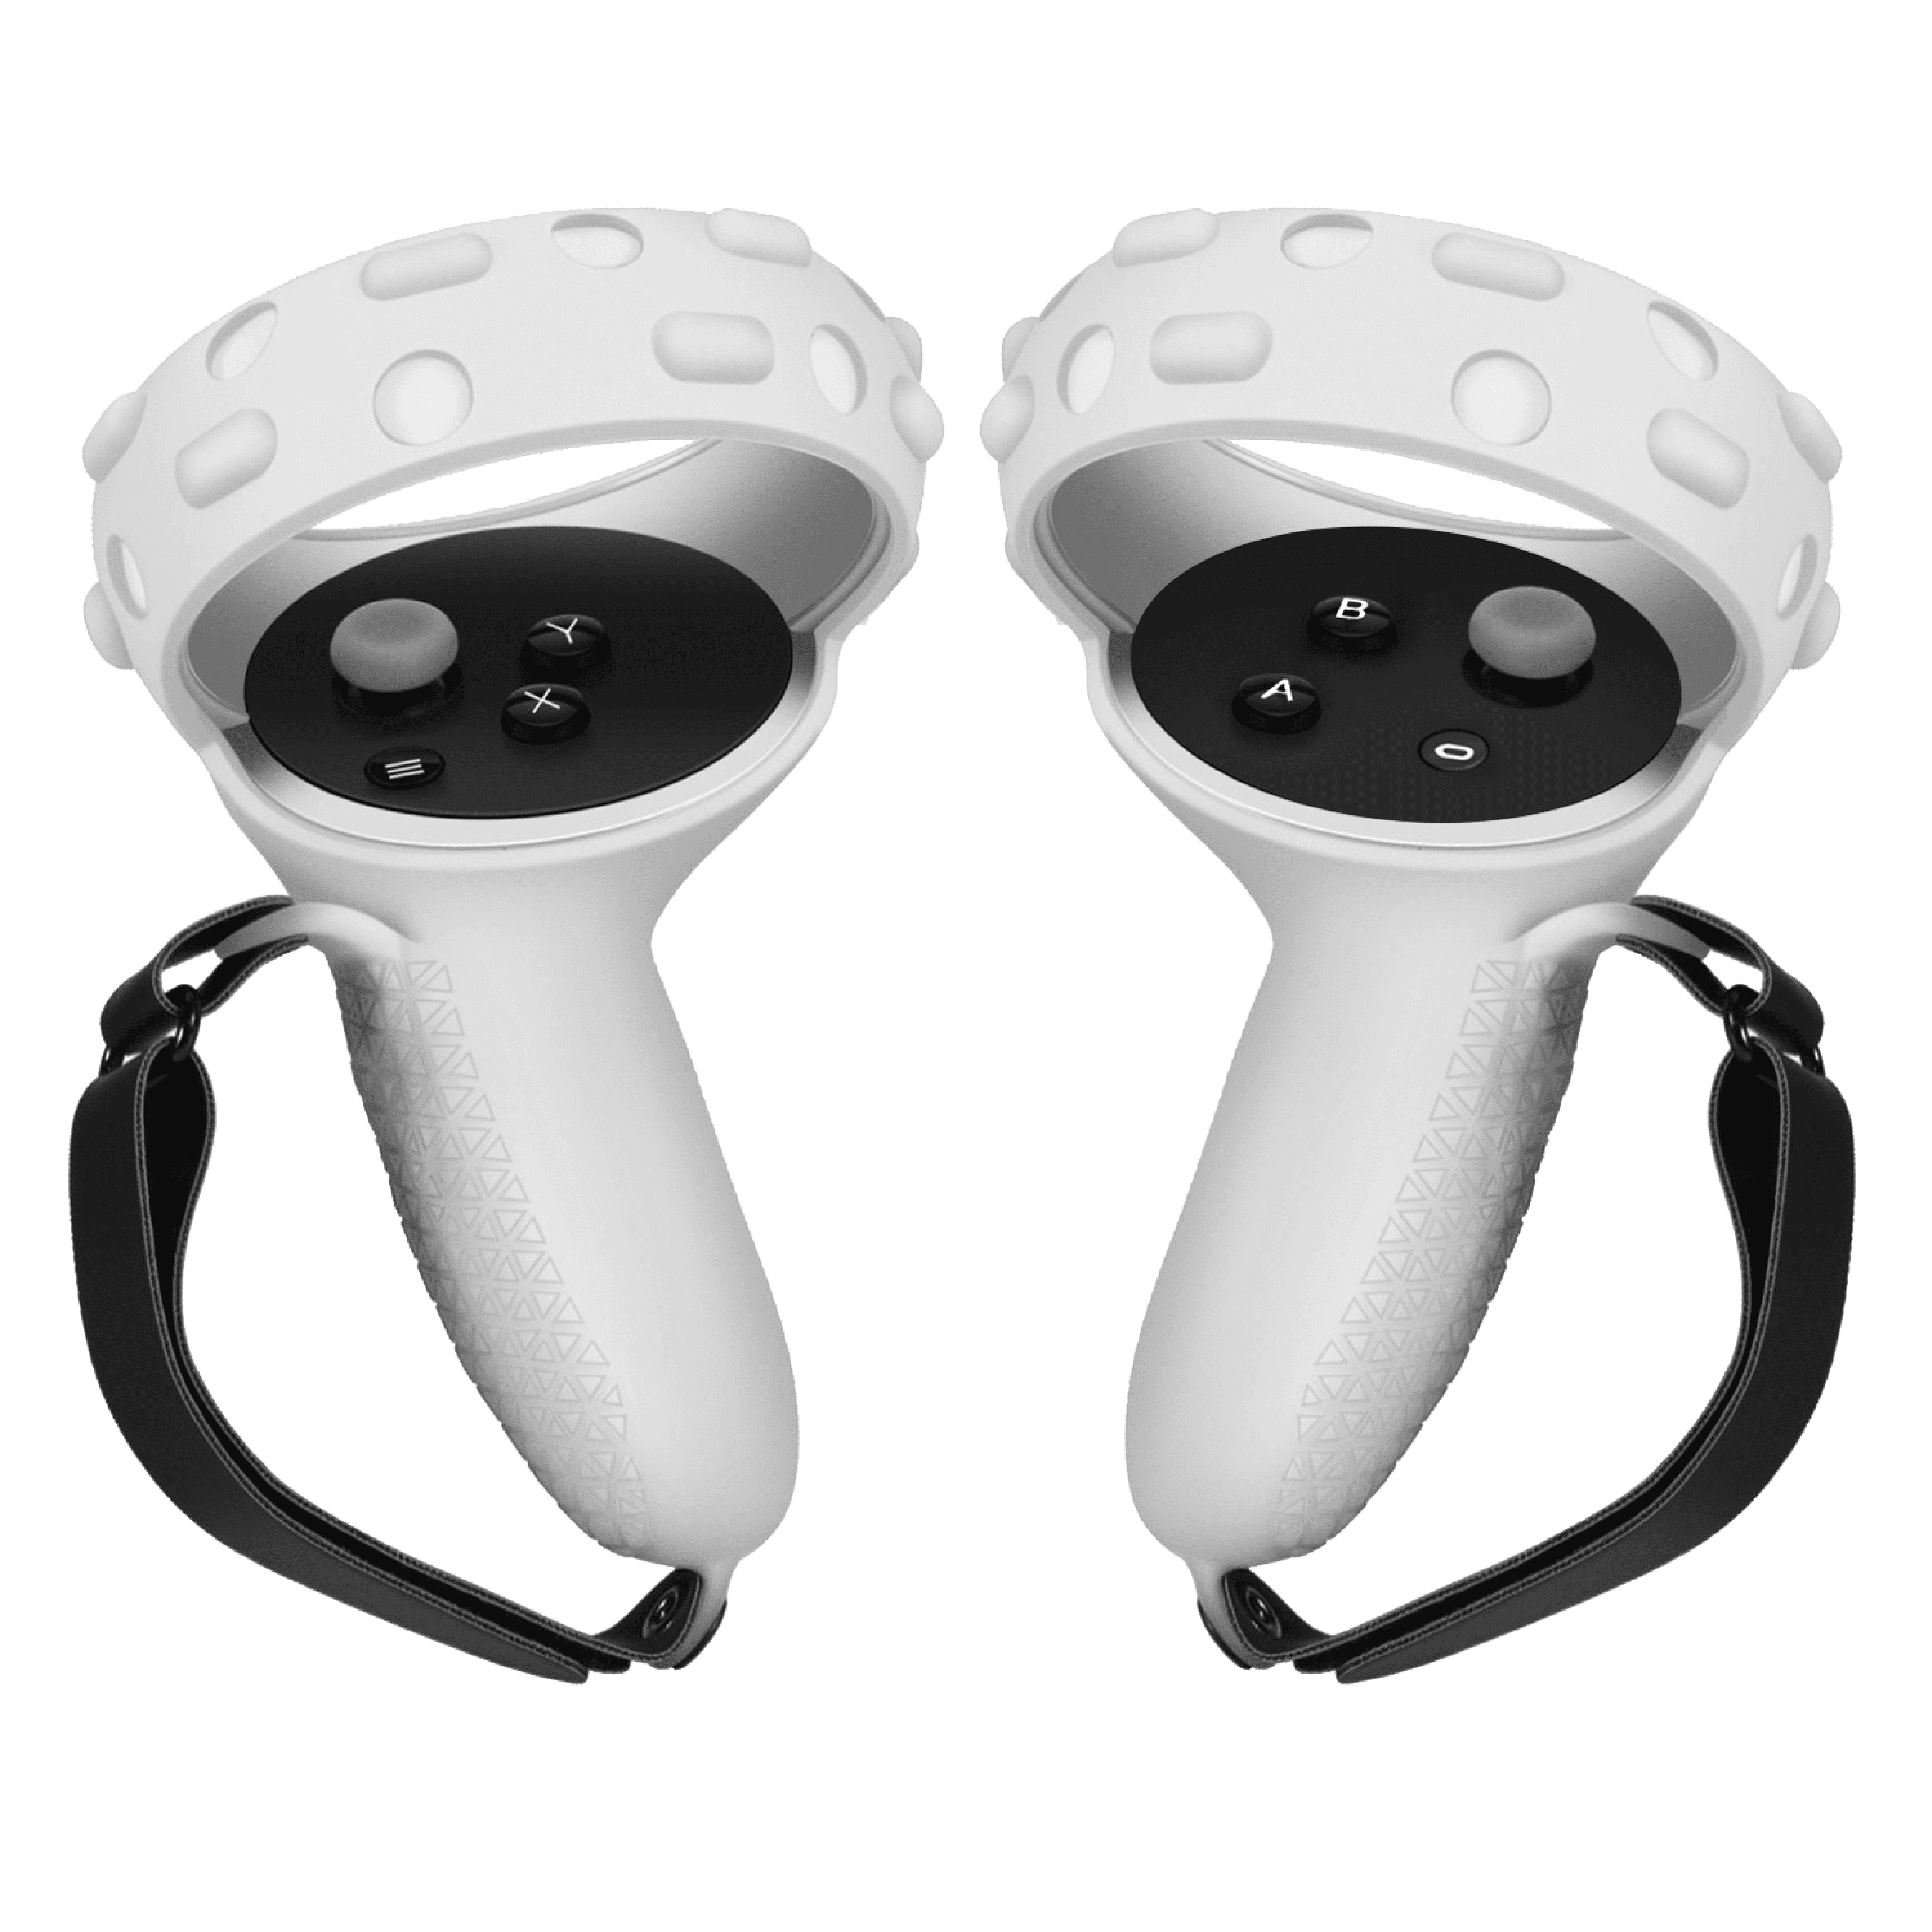 Insten 2 Pack Silicone Grip Covers For Oculus Quest 2 Touch Controllers  With Adjustable Knuckle Straps, Vr Headset Accessories, Gray : Target